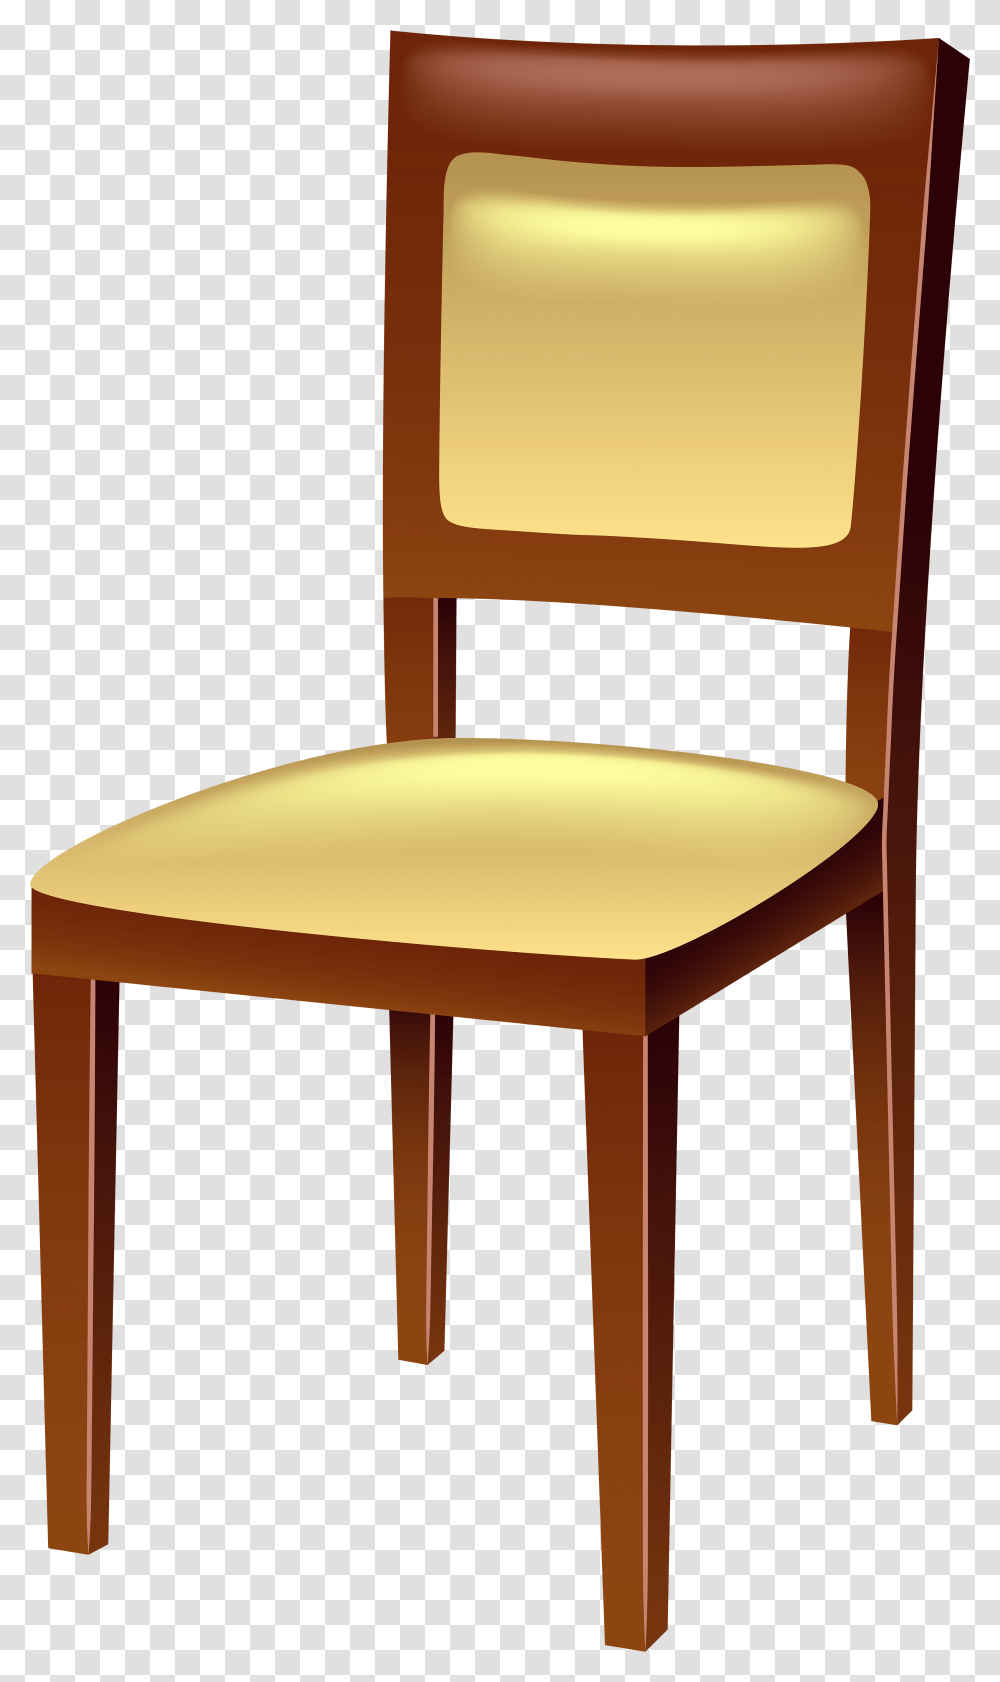 Chair Clip Art Image Gallery Yopriceville Chair Clipart Background, Furniture, Lamp Transparent Png